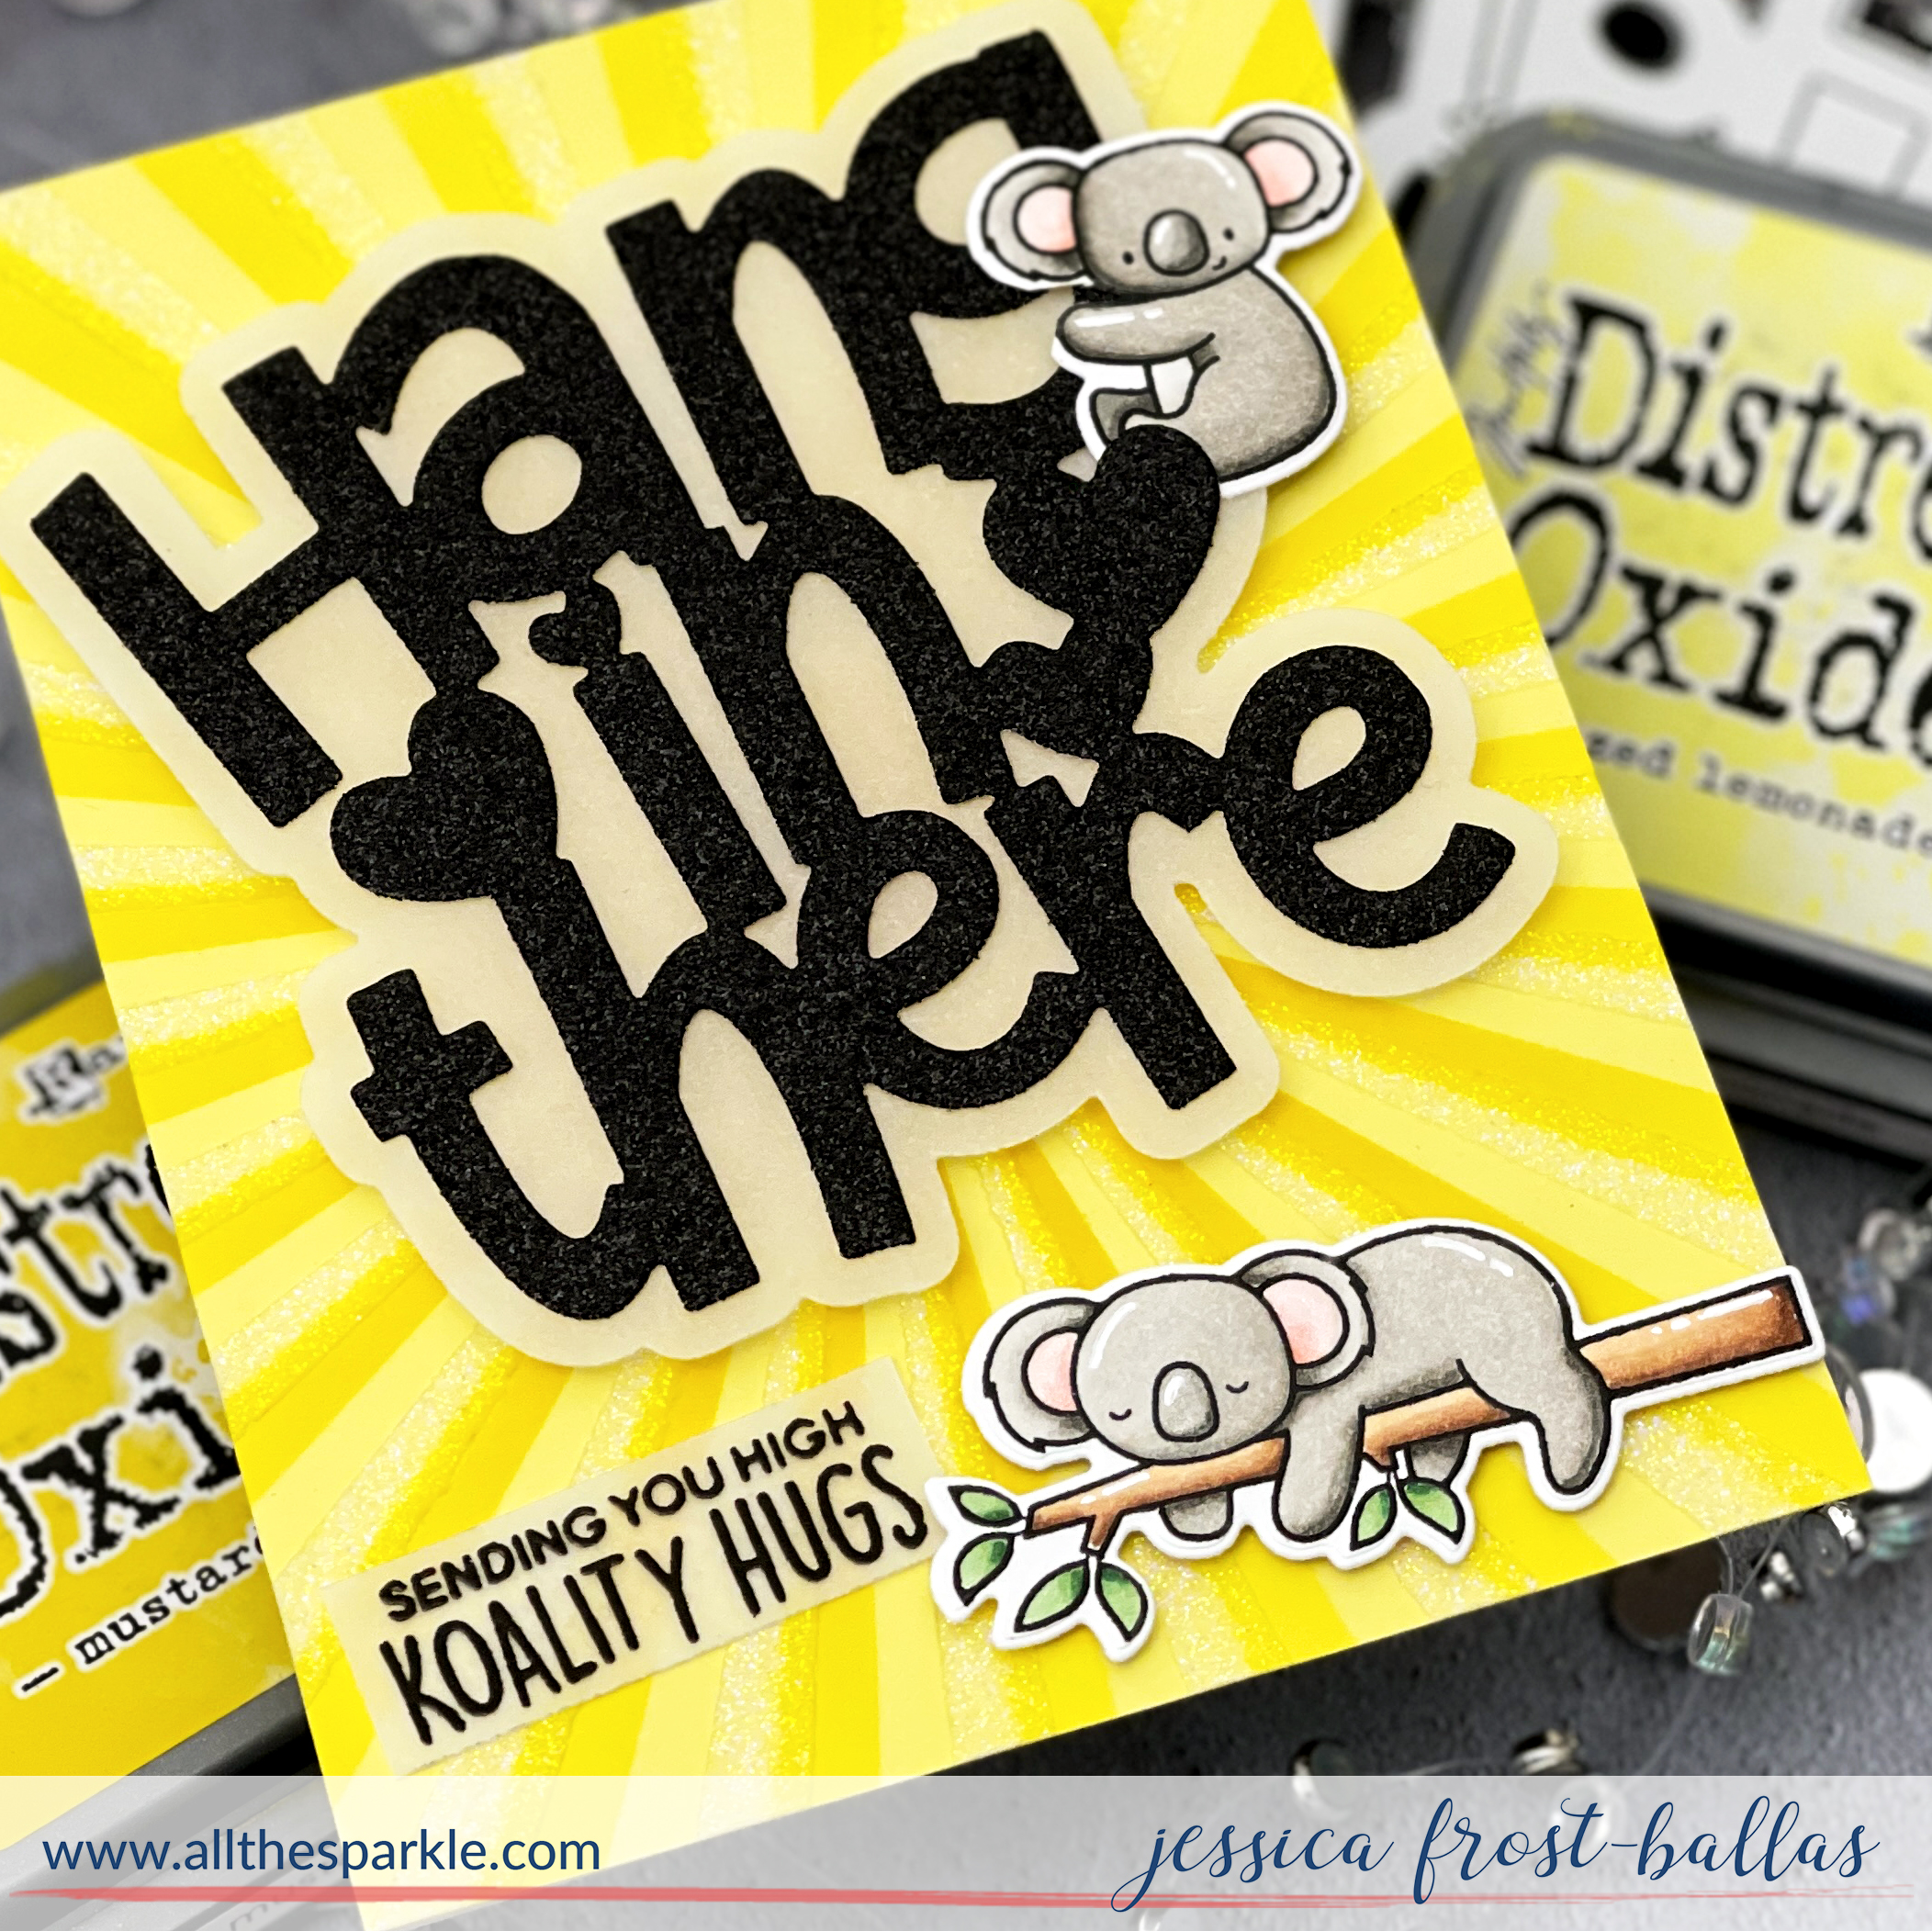 Hang in There by Jessica Frost-Ballas for Heffy Doodle